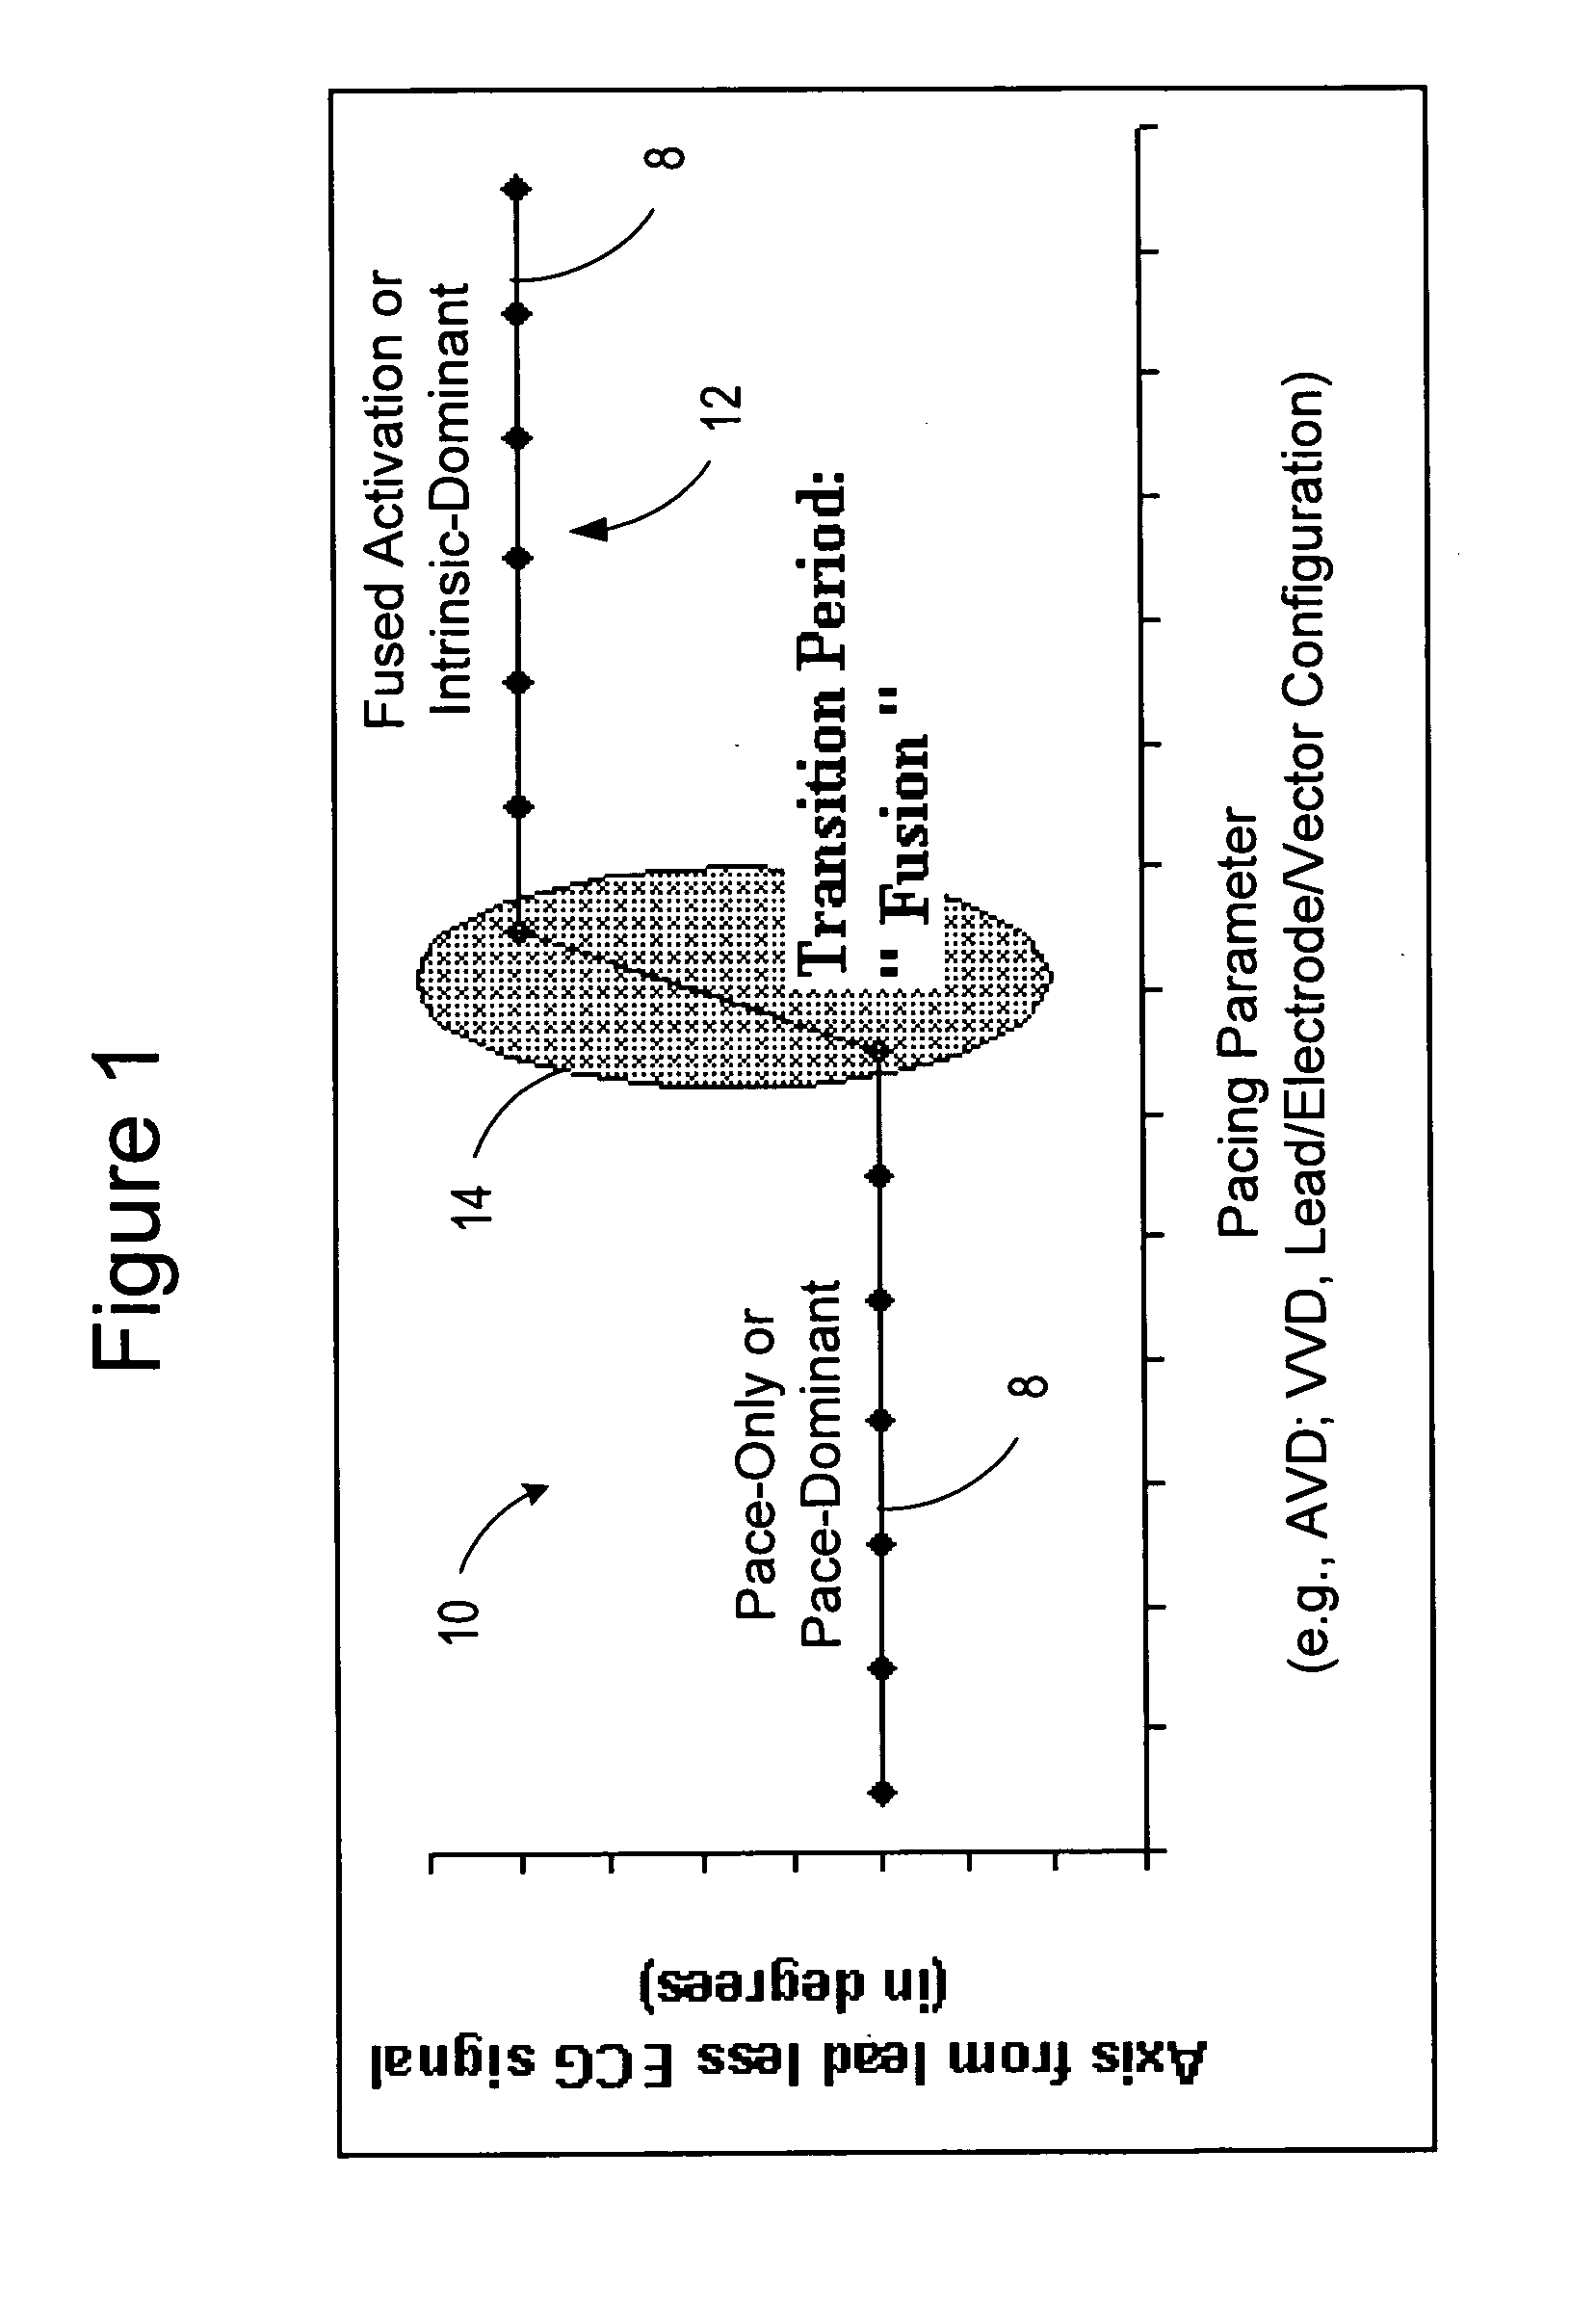 Cardiac resynchronization therapy optimization using cardiac activation sequence information